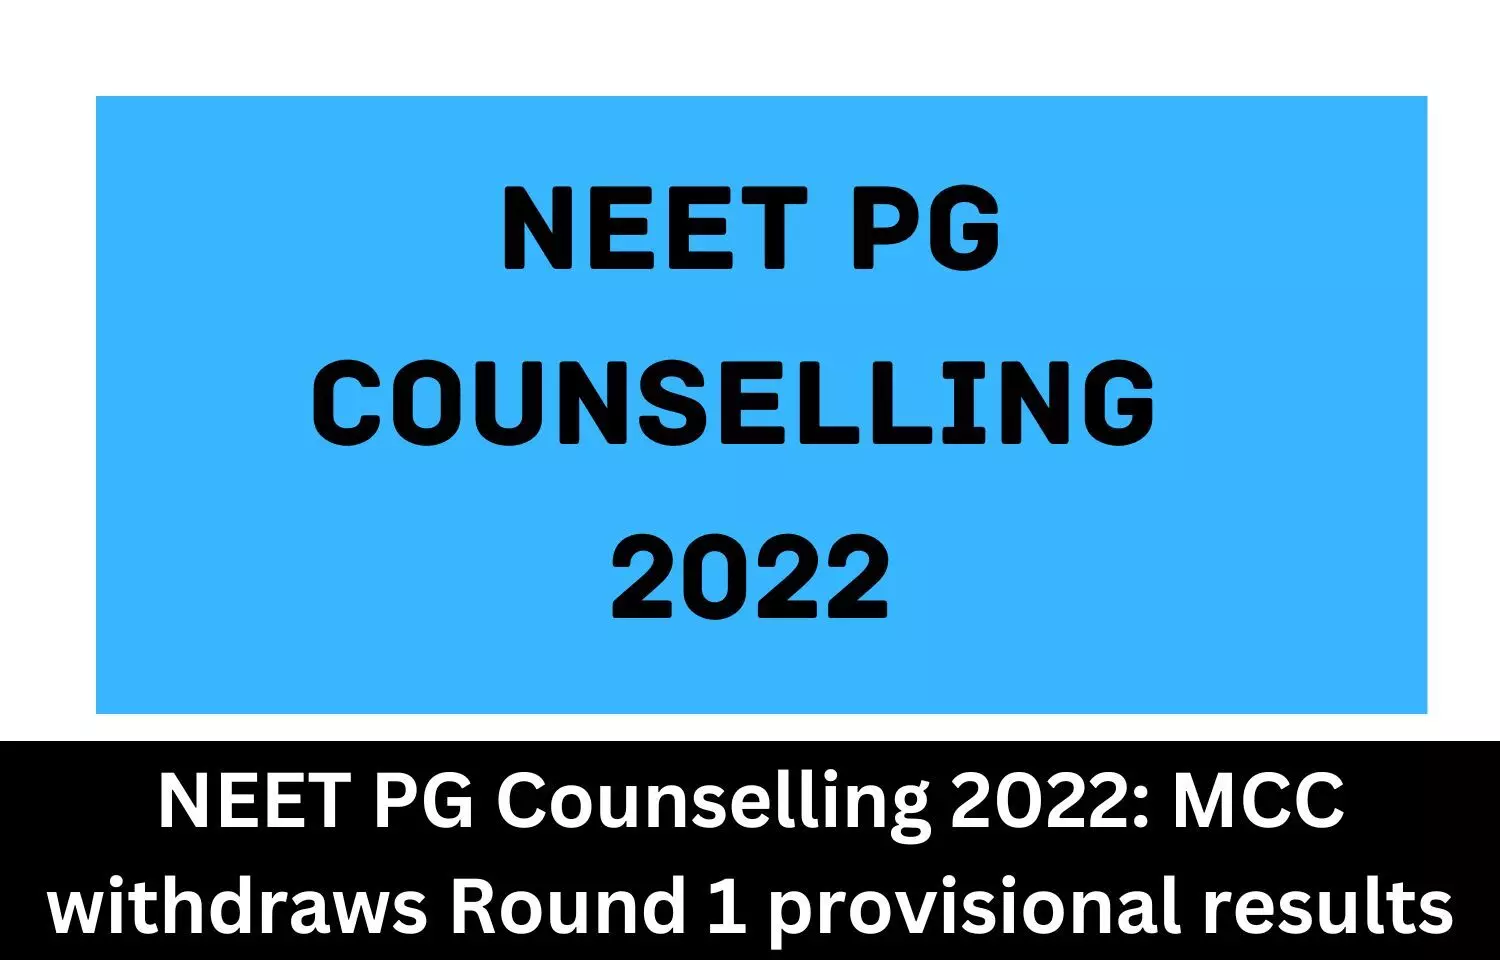 NEET PG counselling 2022: MCC withdraws round 1 provisional results, begins choice filling once again